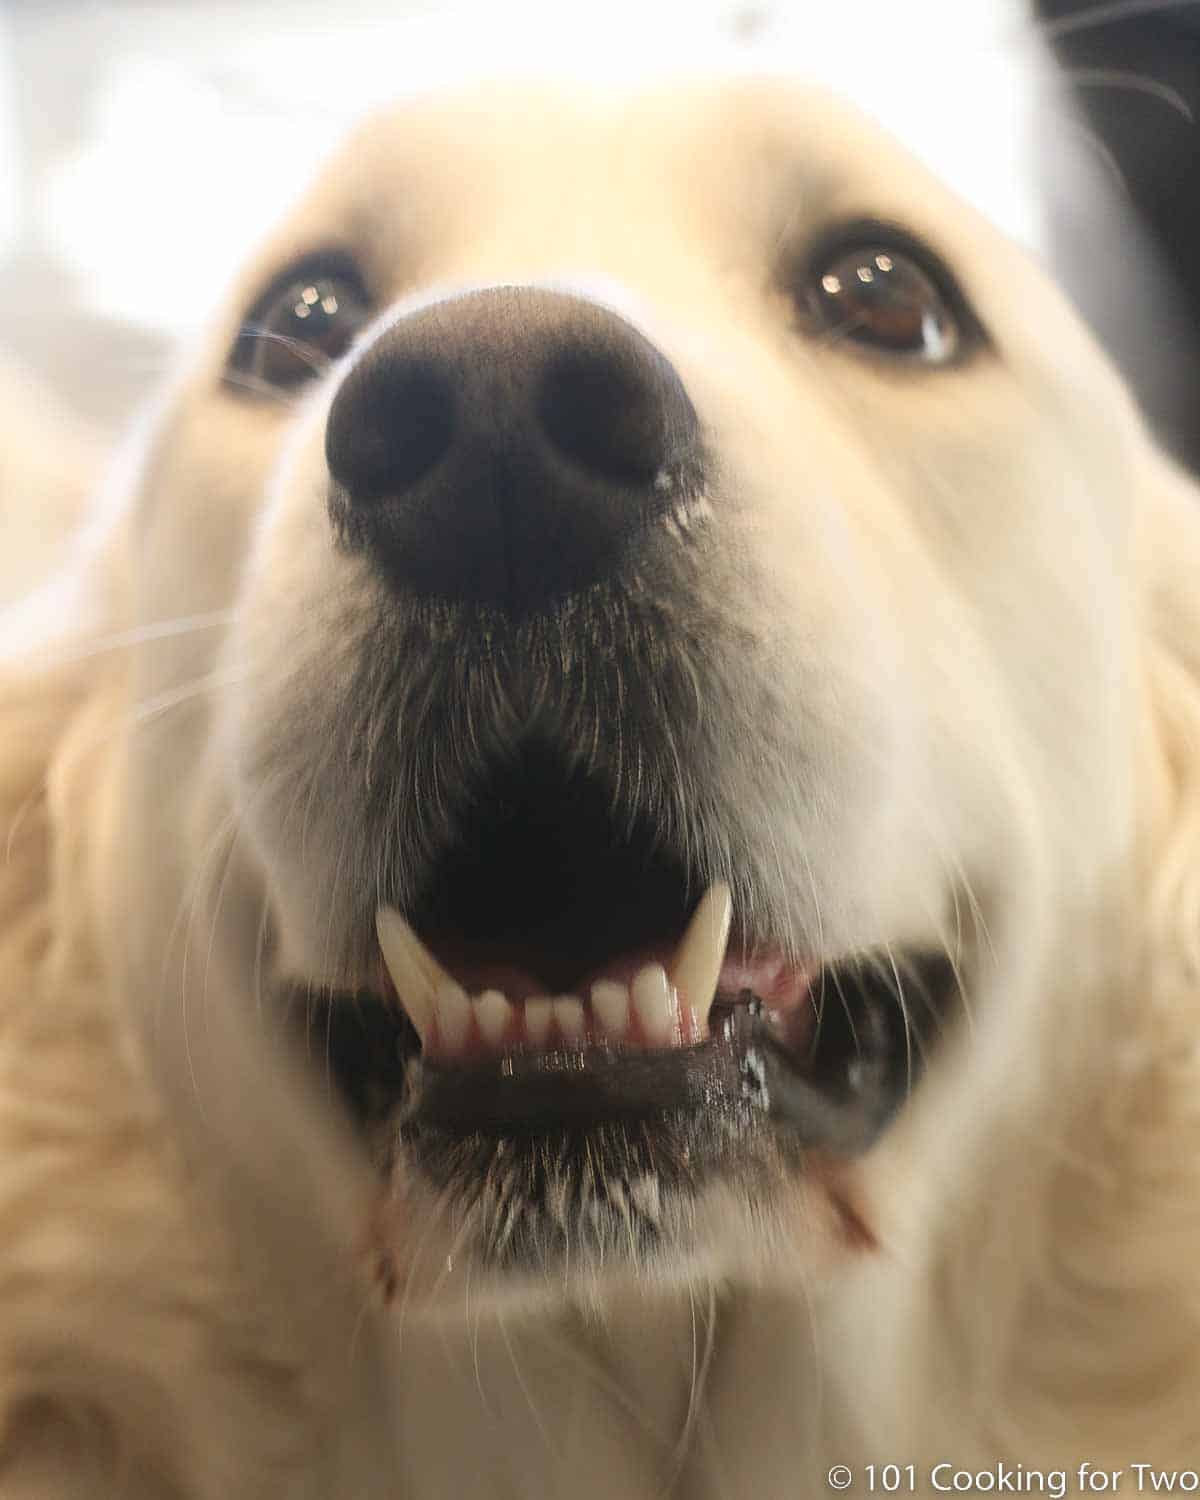 Molly smiling into the camera.